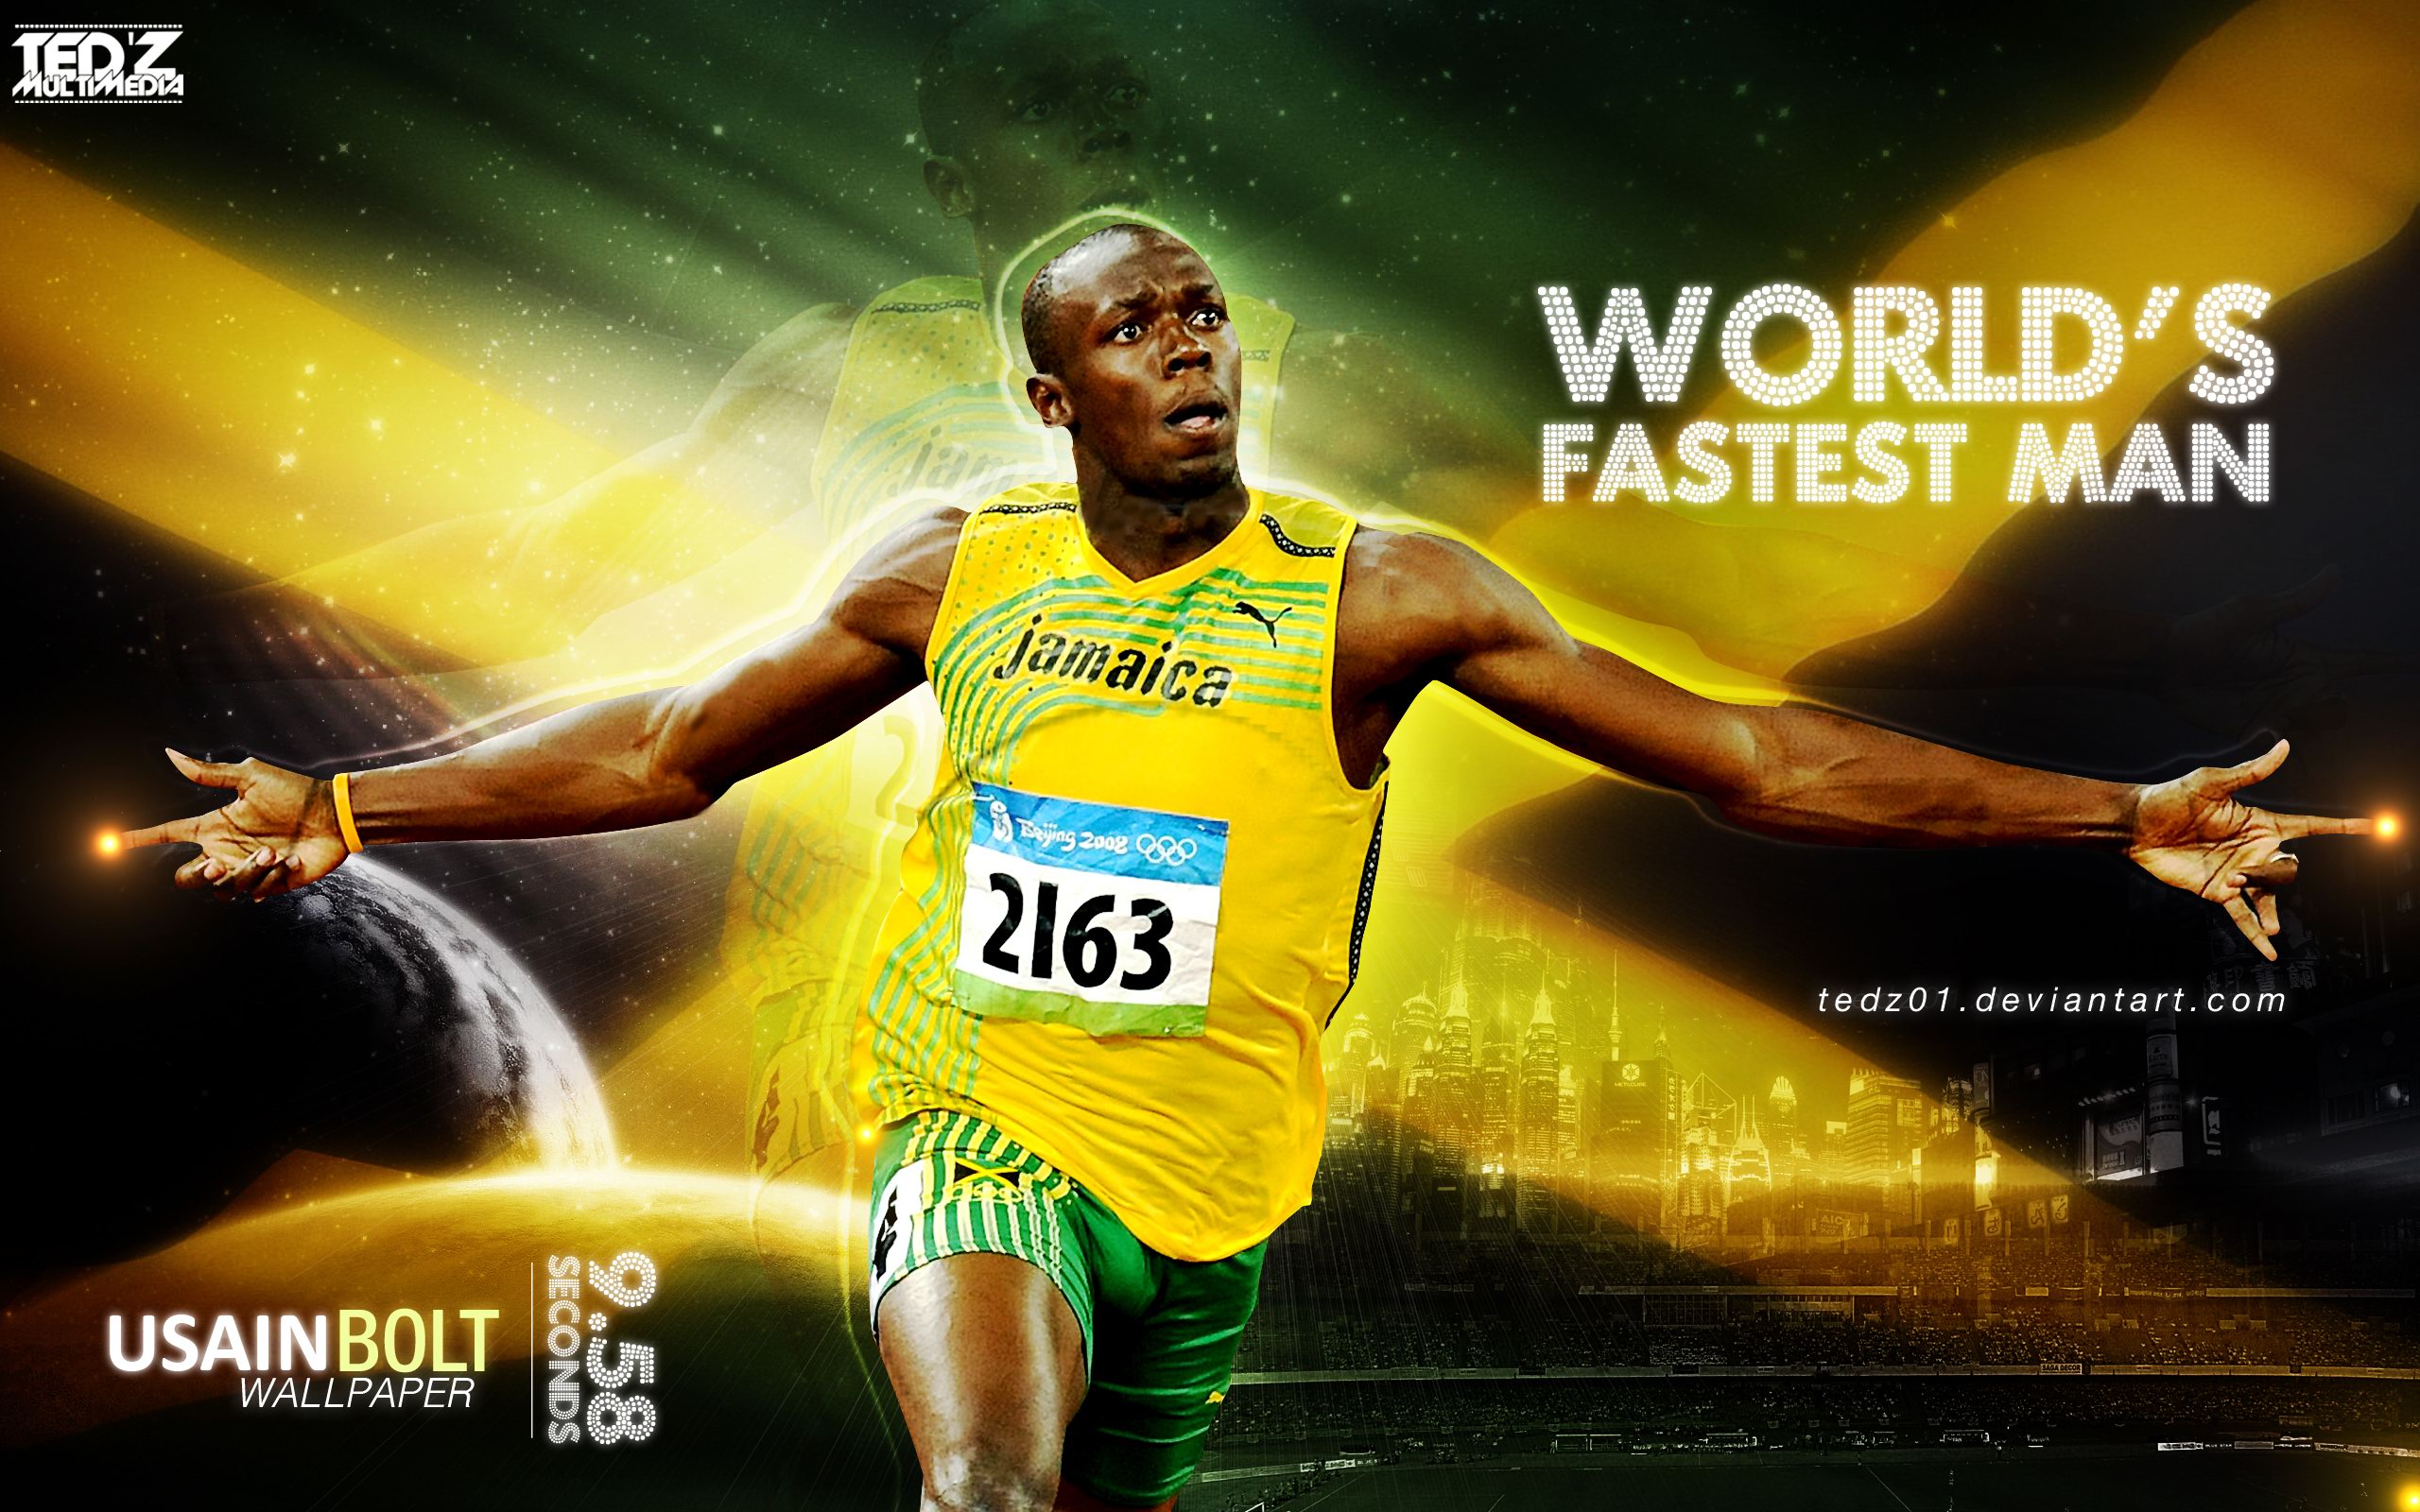 ACE876 NEWS " Usain Bolt to attempt breaking his own world records in ...